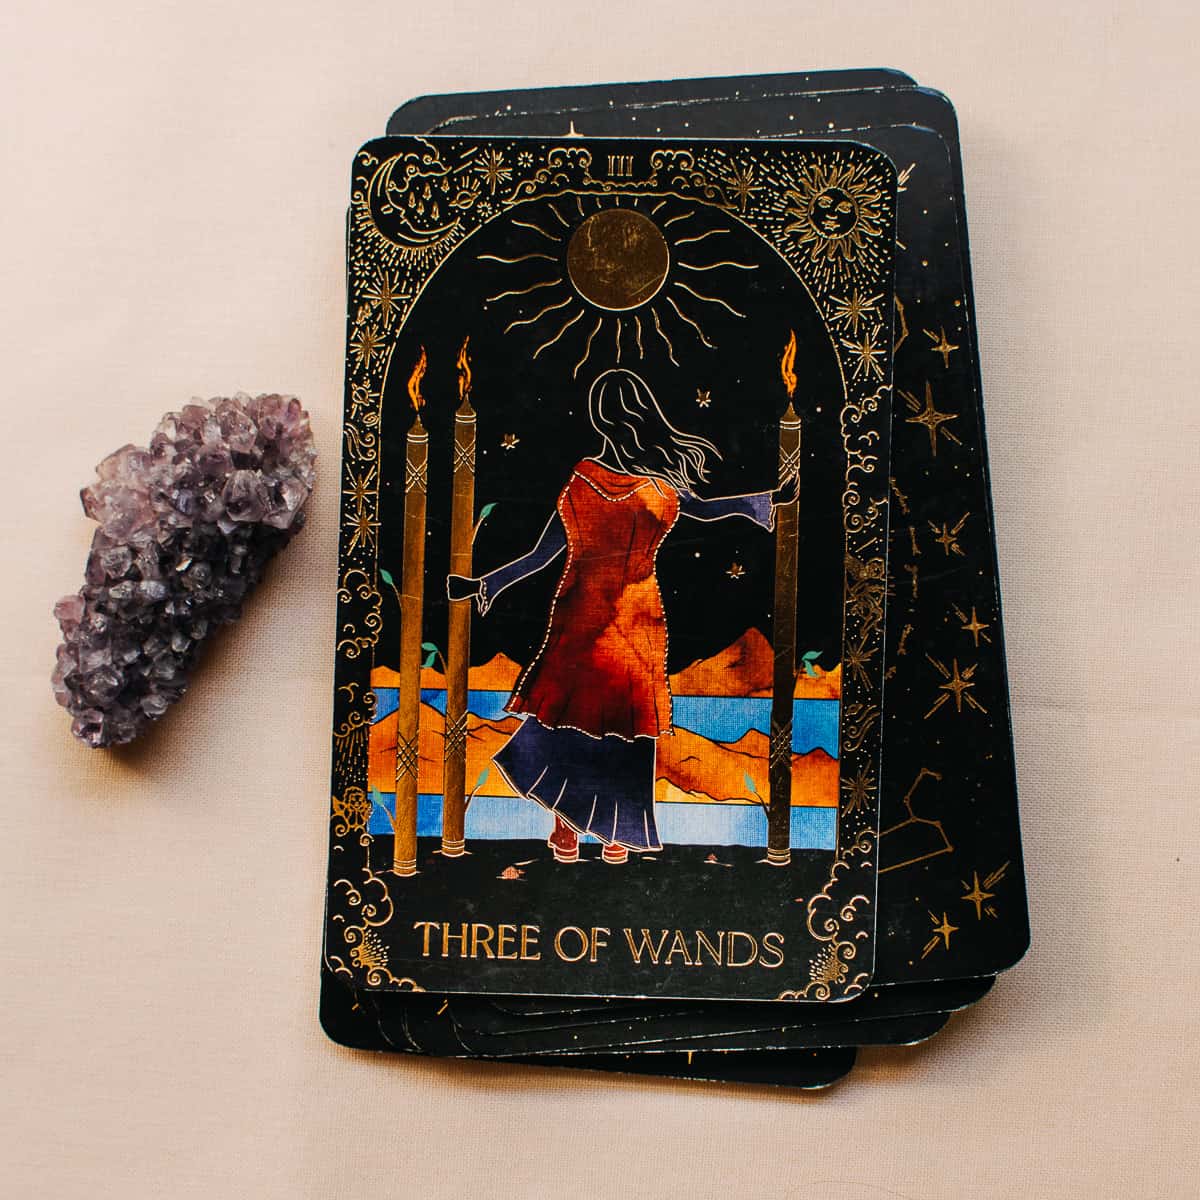 The Three of Wands card from the Dreamy Moons tarot deck.